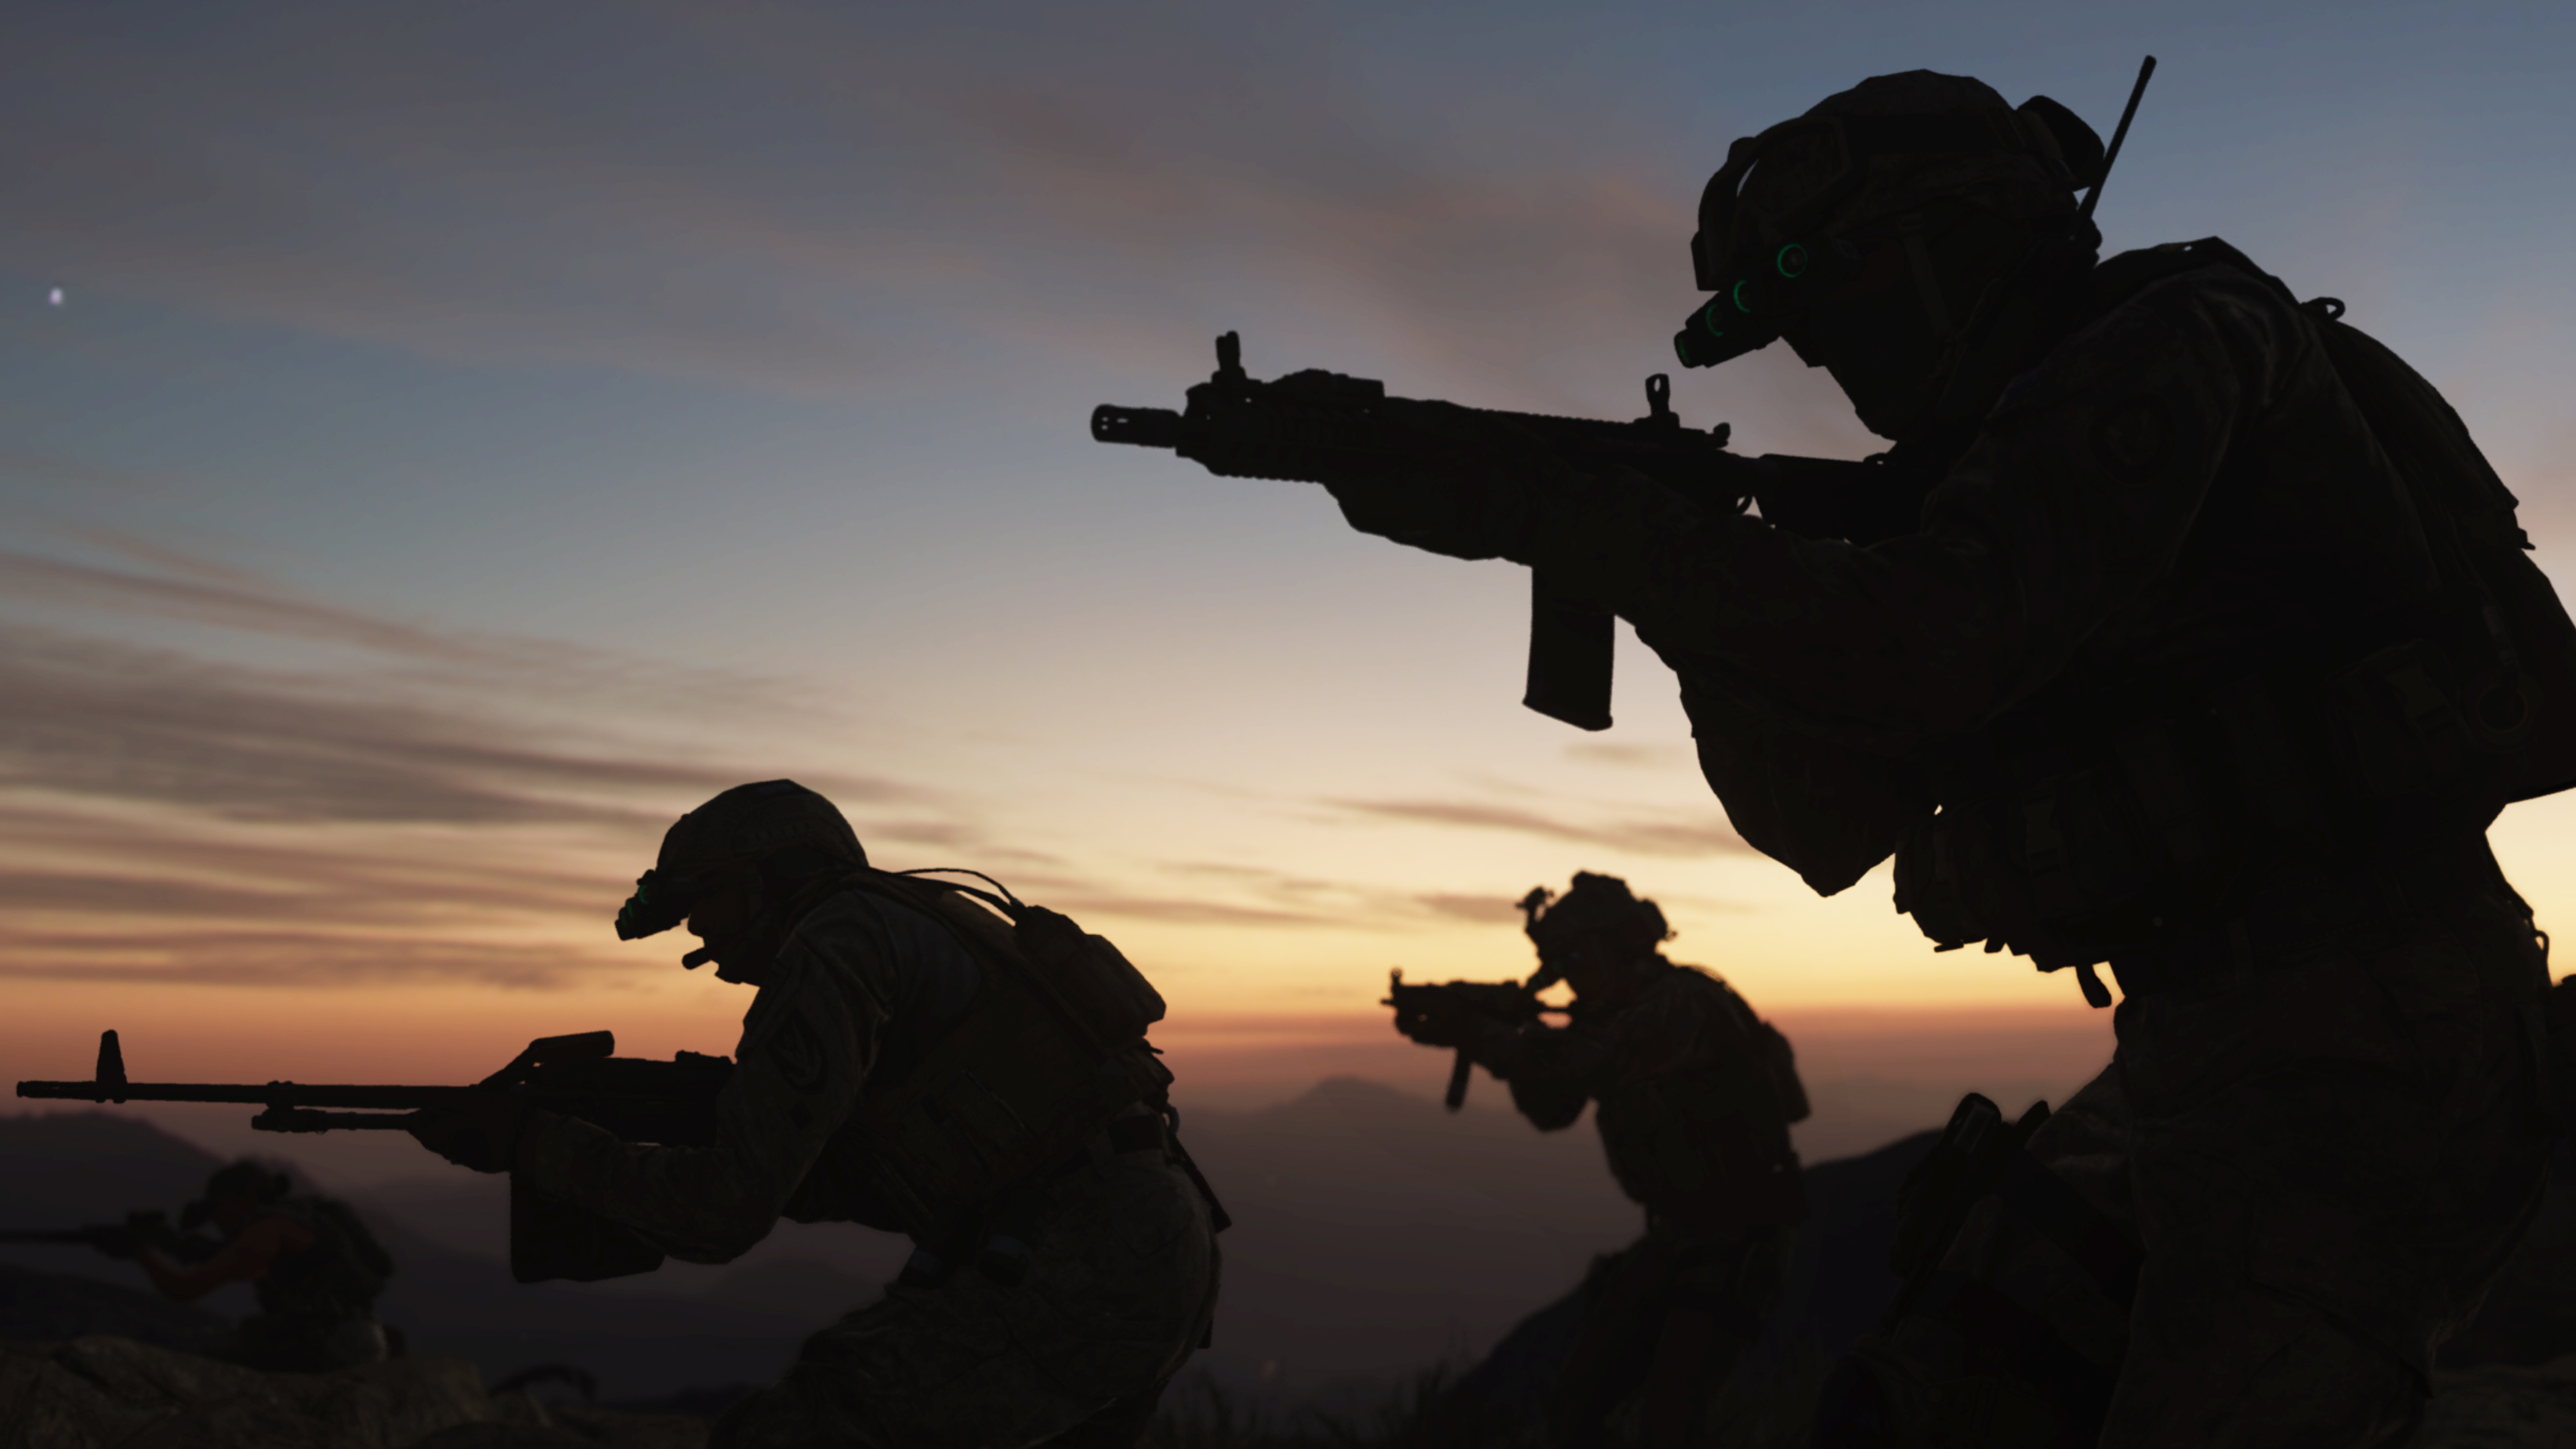 Call of Duty Modern Warfare screenshot, soldiers moving with guns raised silhouetted against the sky